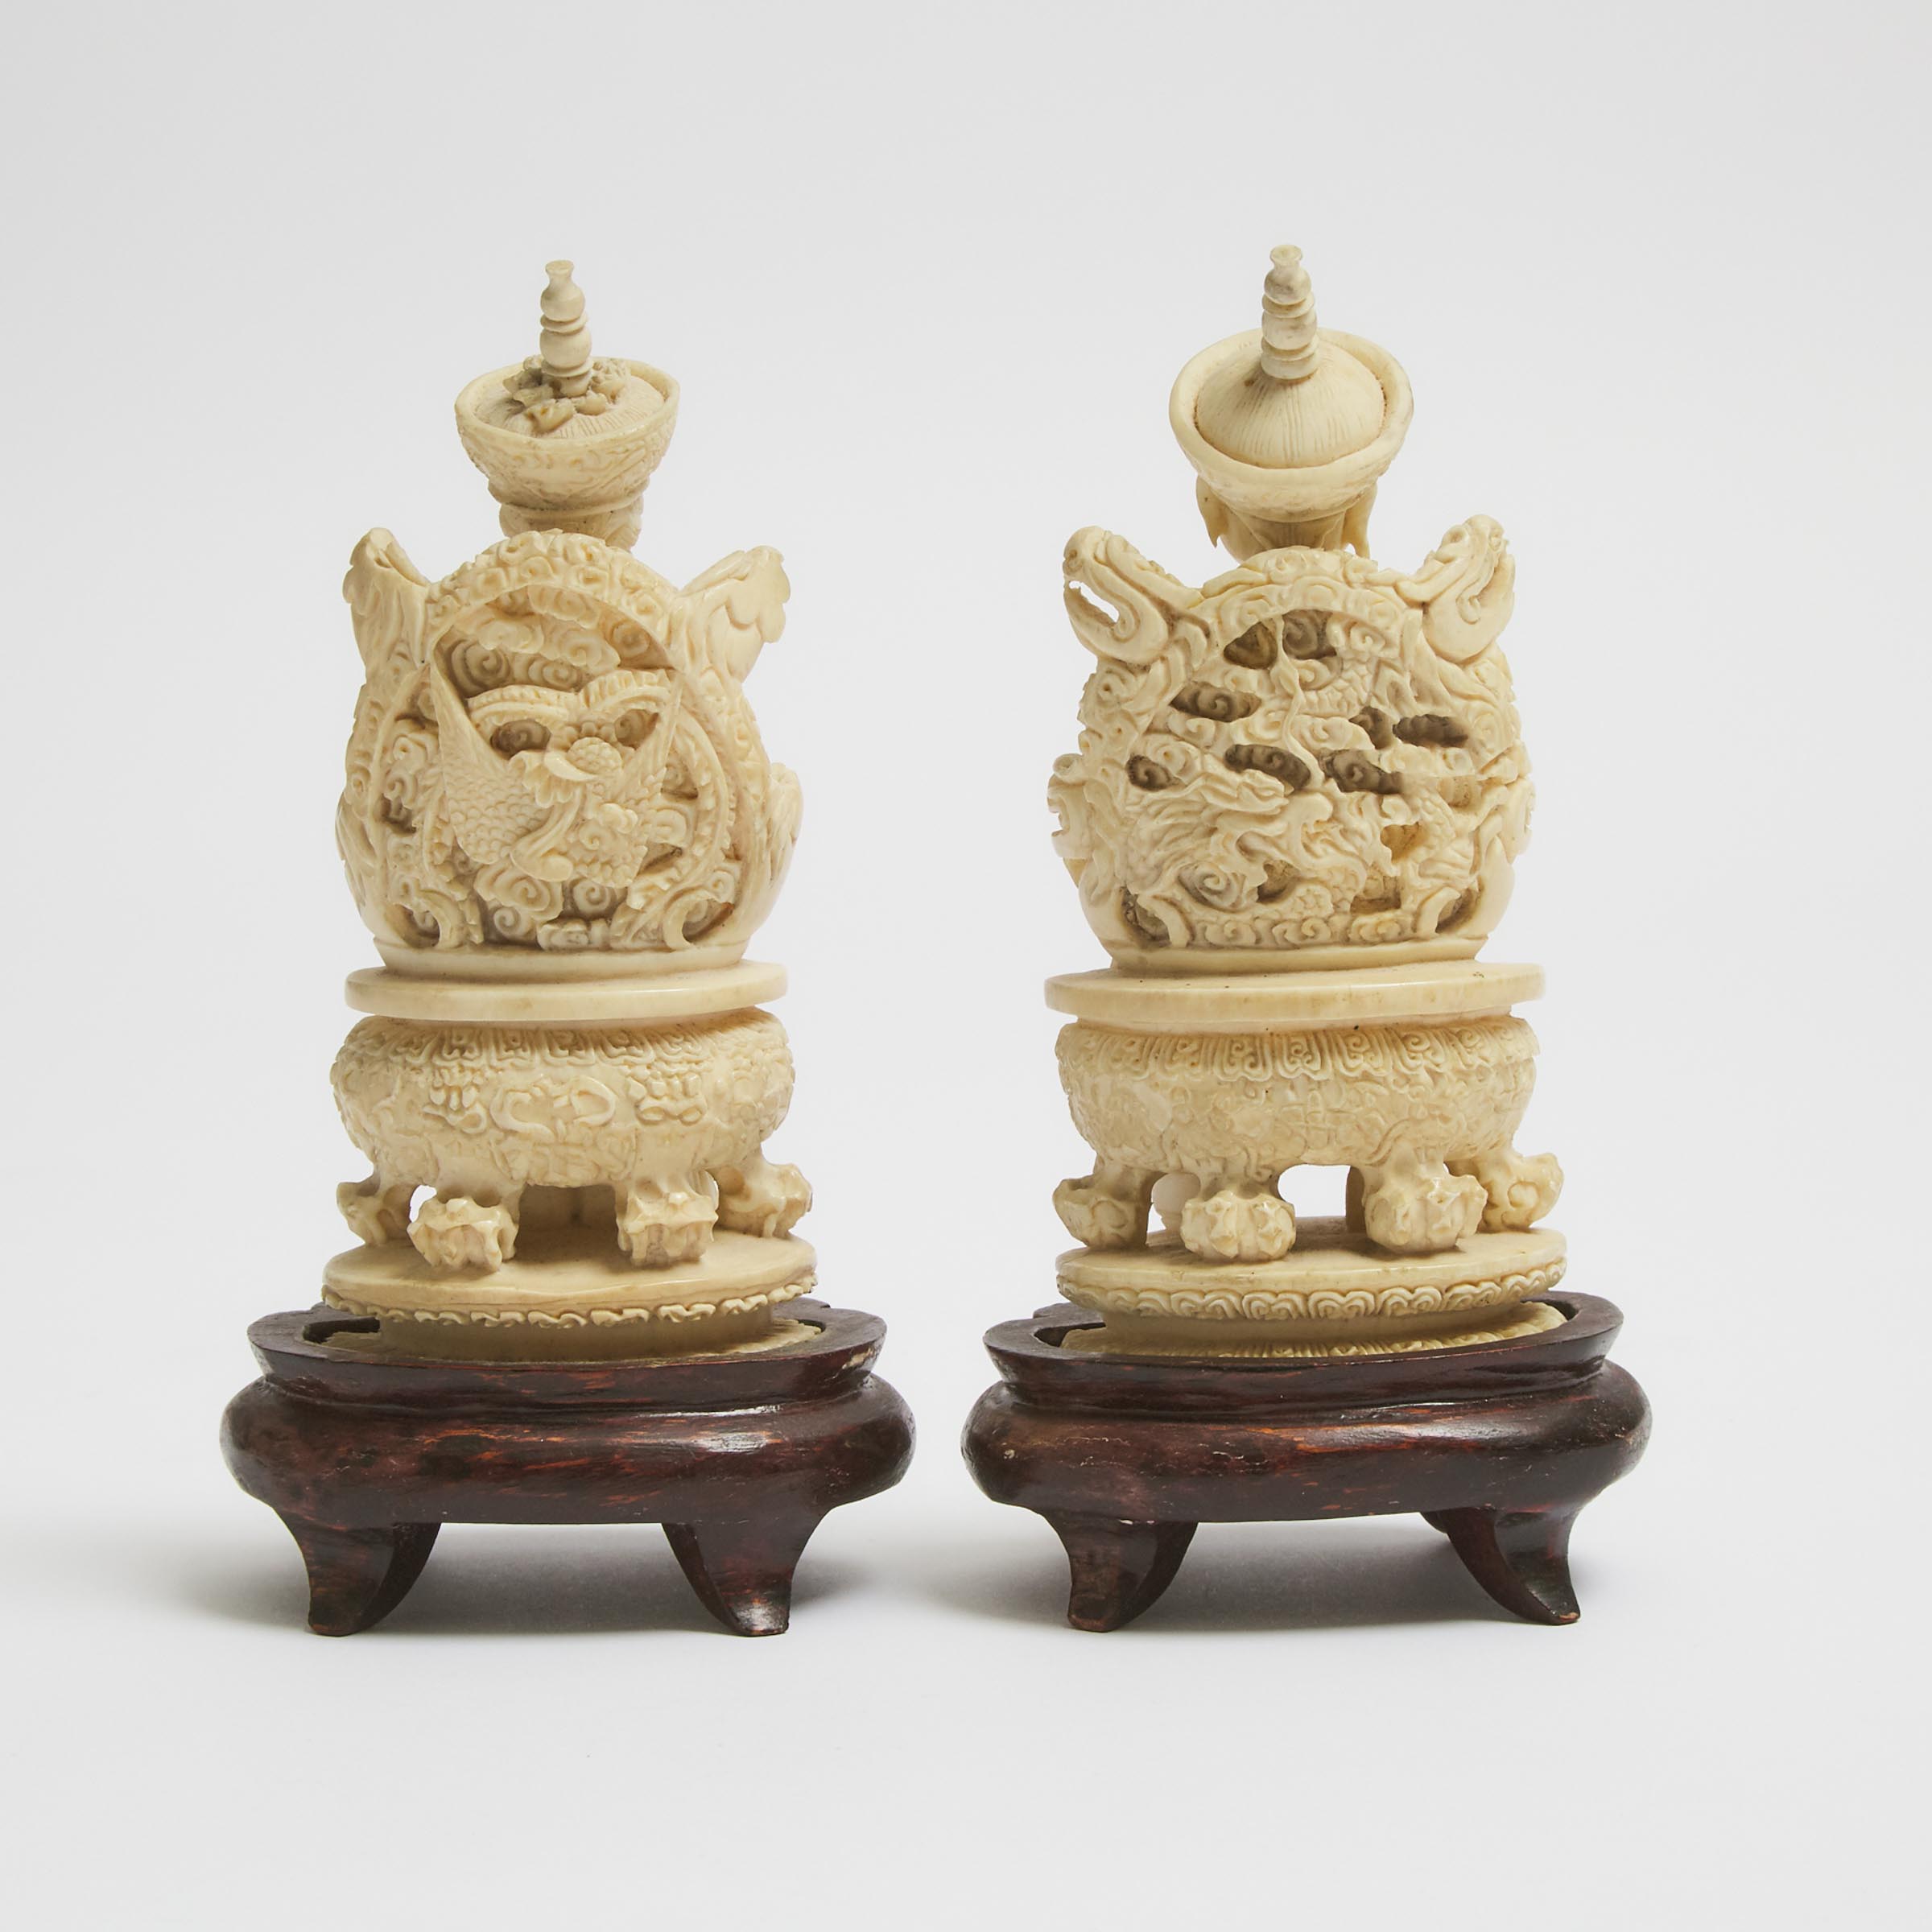 An Ivory Carved Emperor and Empress Pair, Early 20th Century